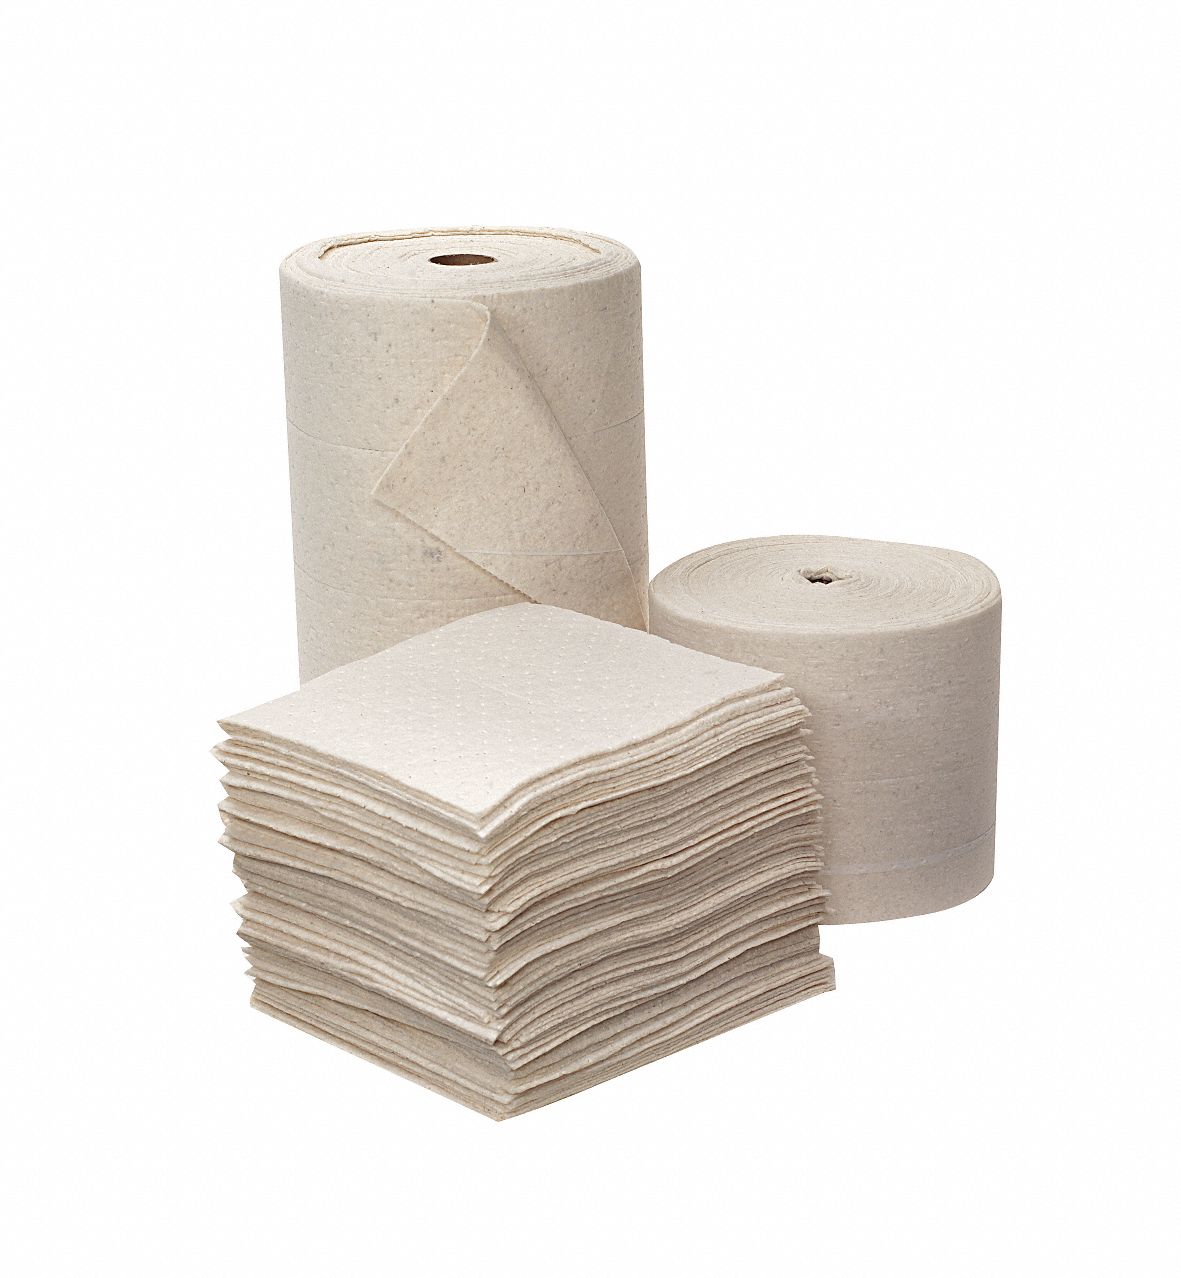 Heavy, Polypropylene/Synthetic Fibers/Natural Fibers Absorbent Roll, Fluids Absorbed: Oil Only / Pet